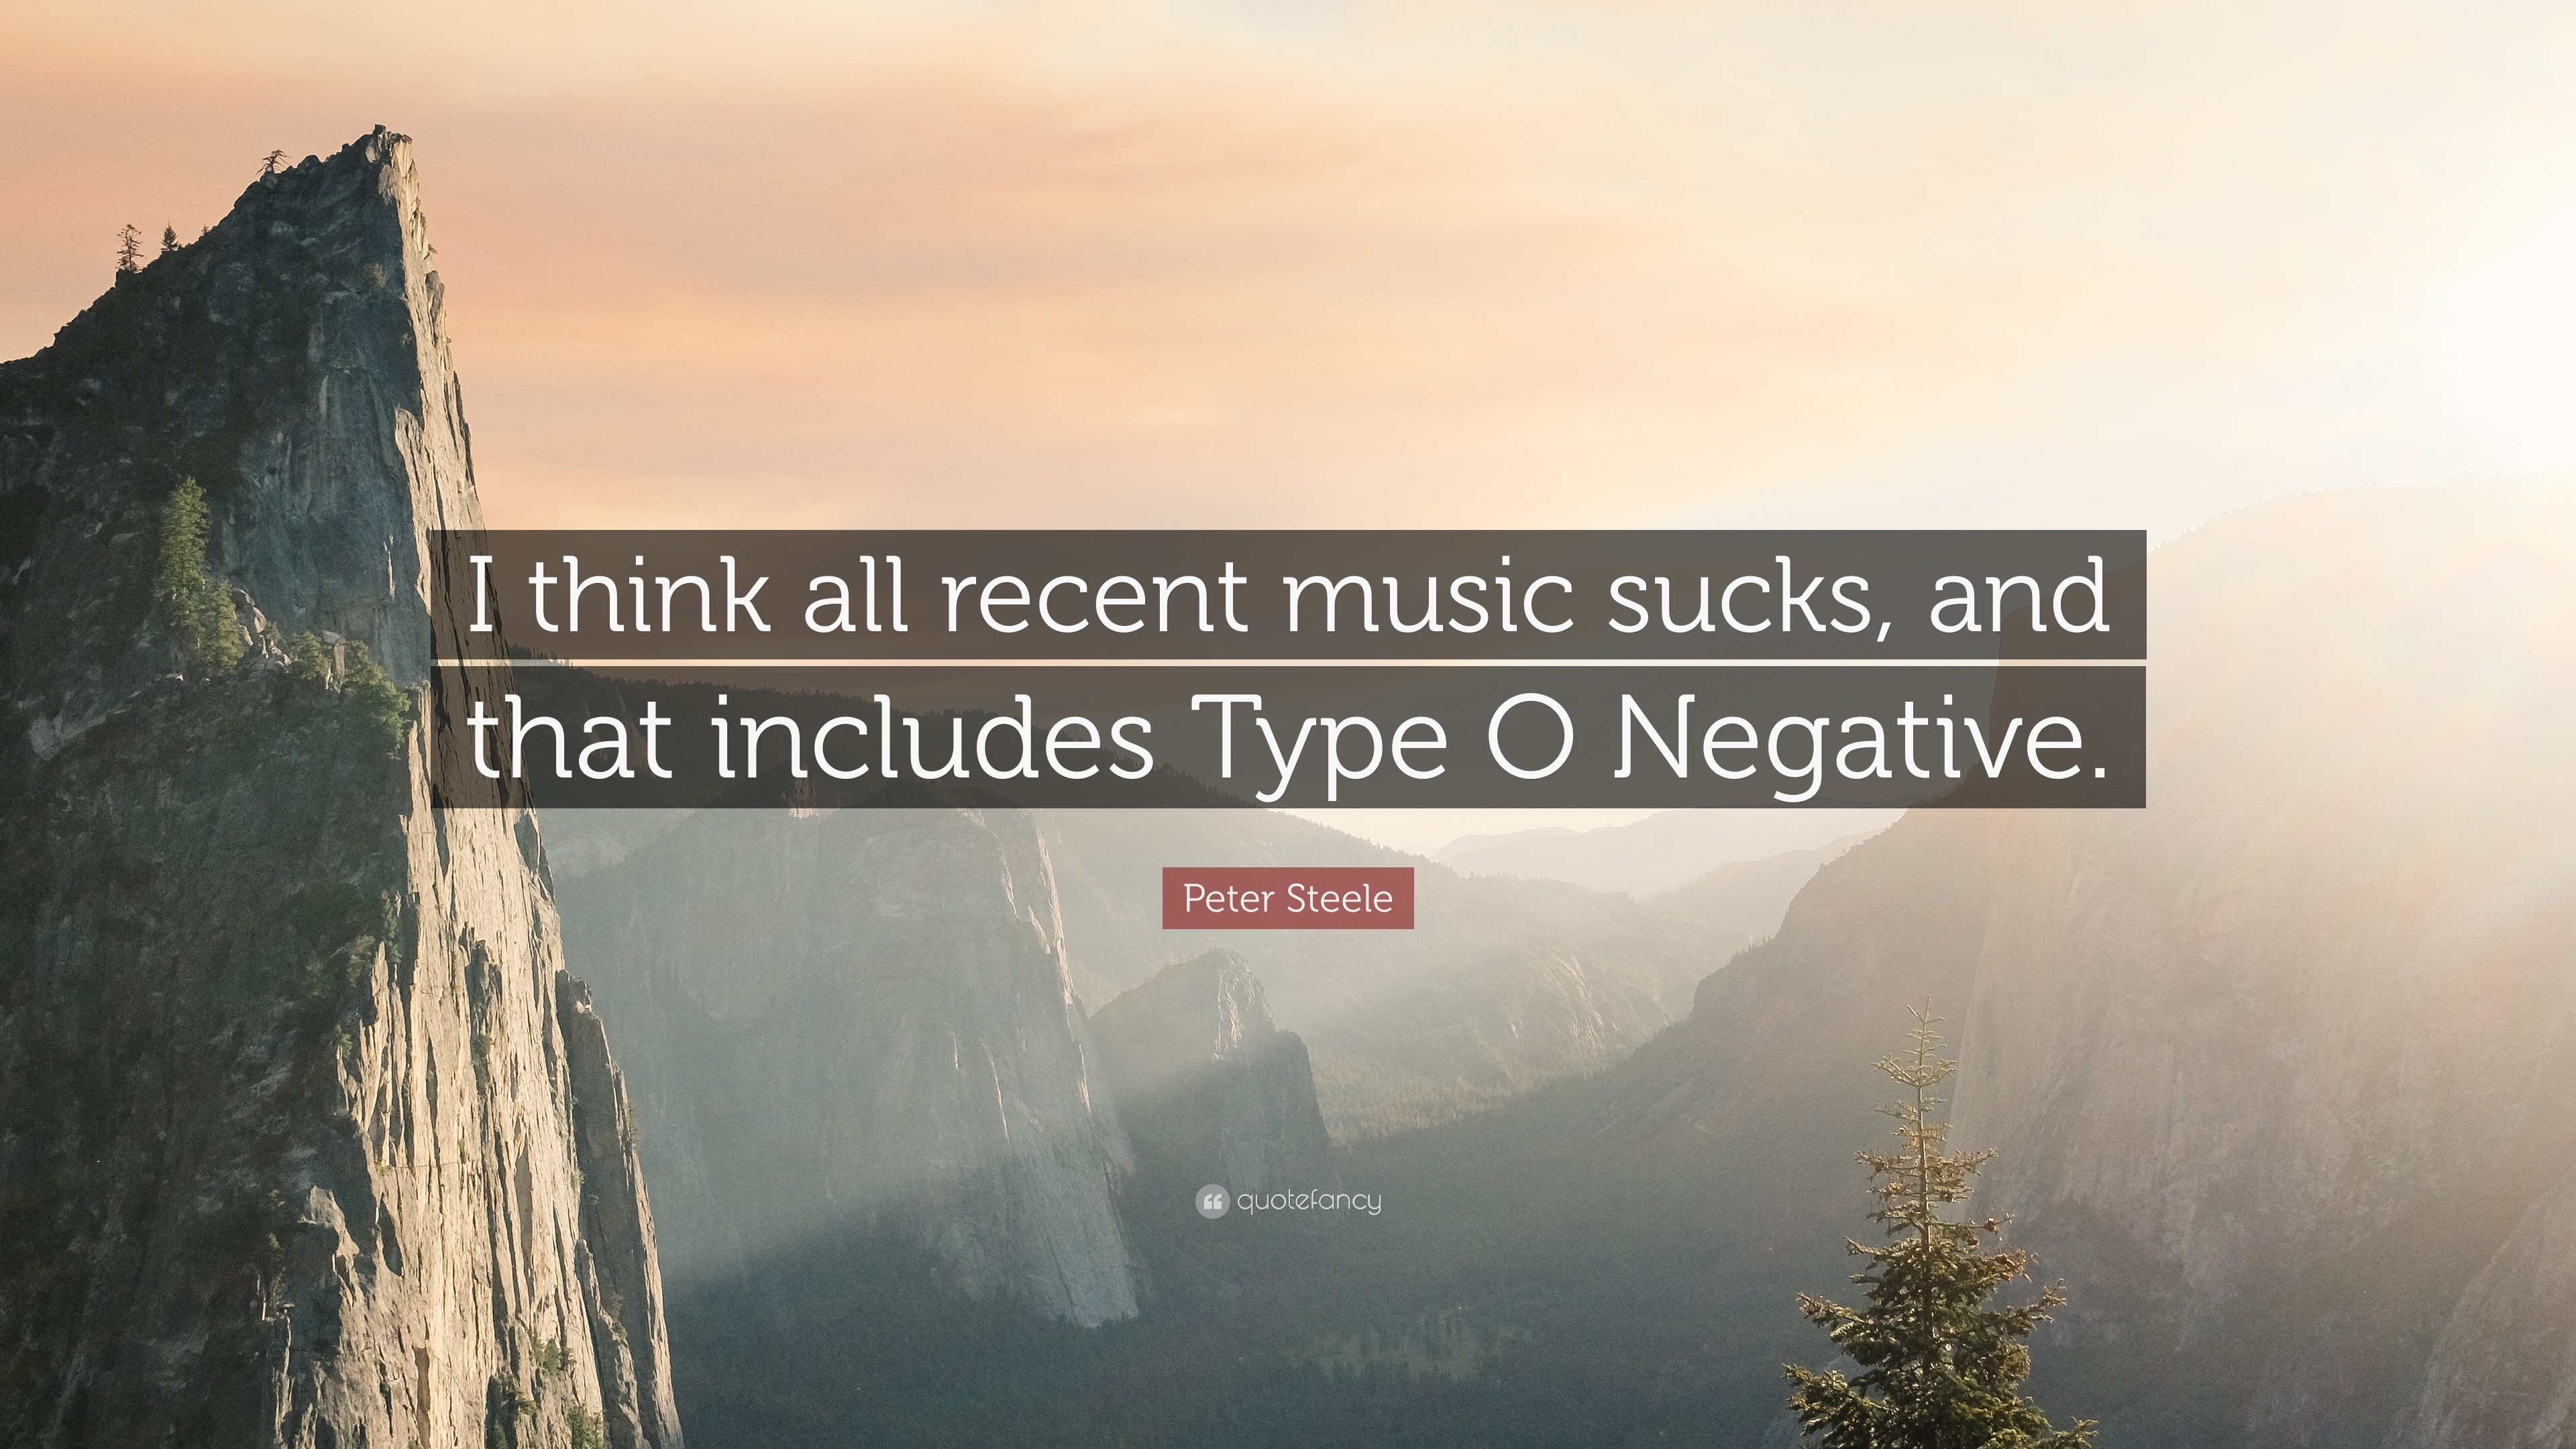 3840x2160 Peter Steele Quote: “I think all recent music sucks, and that includes Type